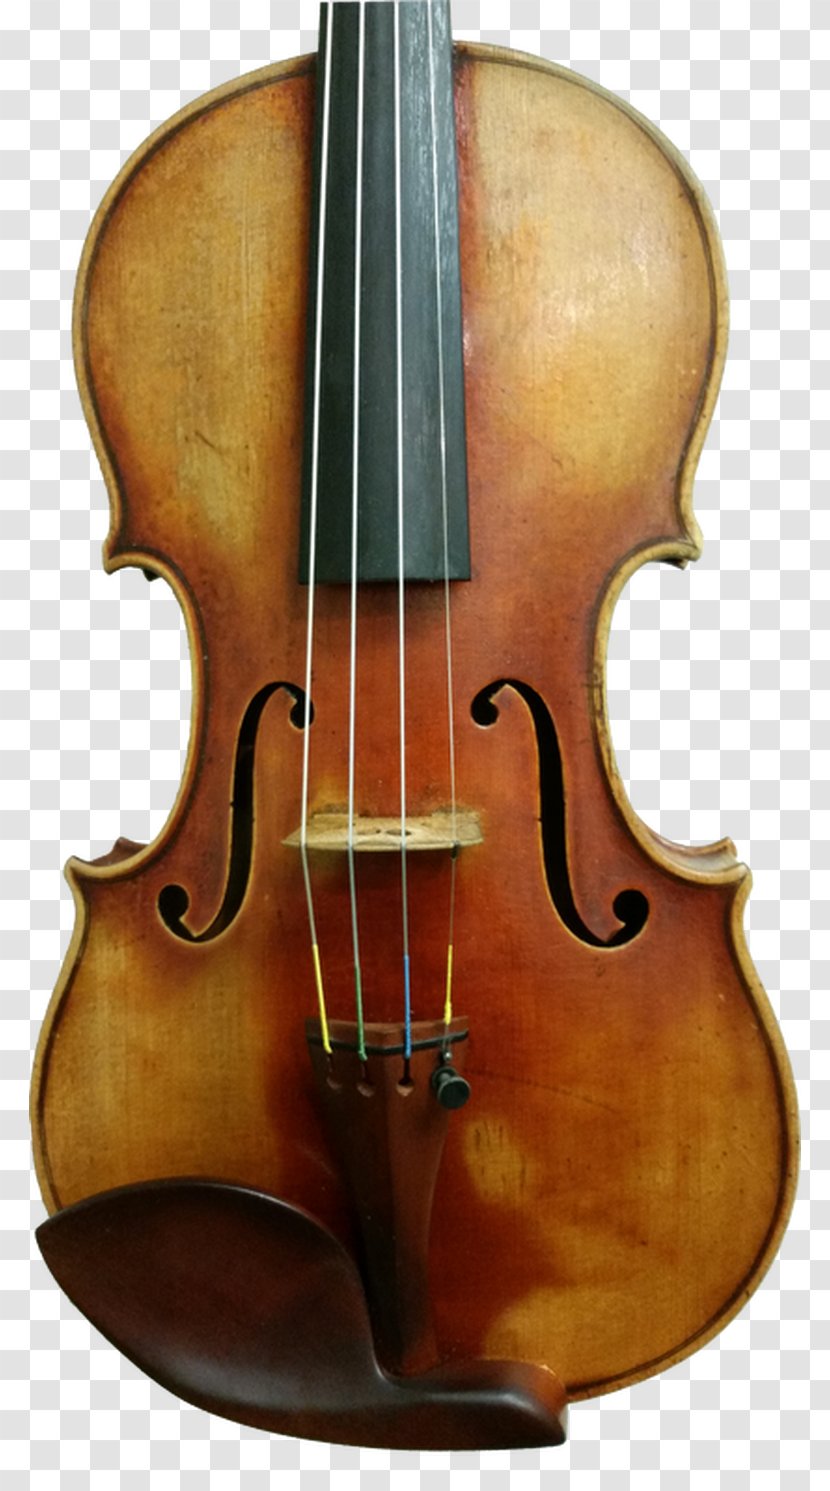 Bass Violin Violone Bowed String Instrument Cello - Instruments Transparent PNG